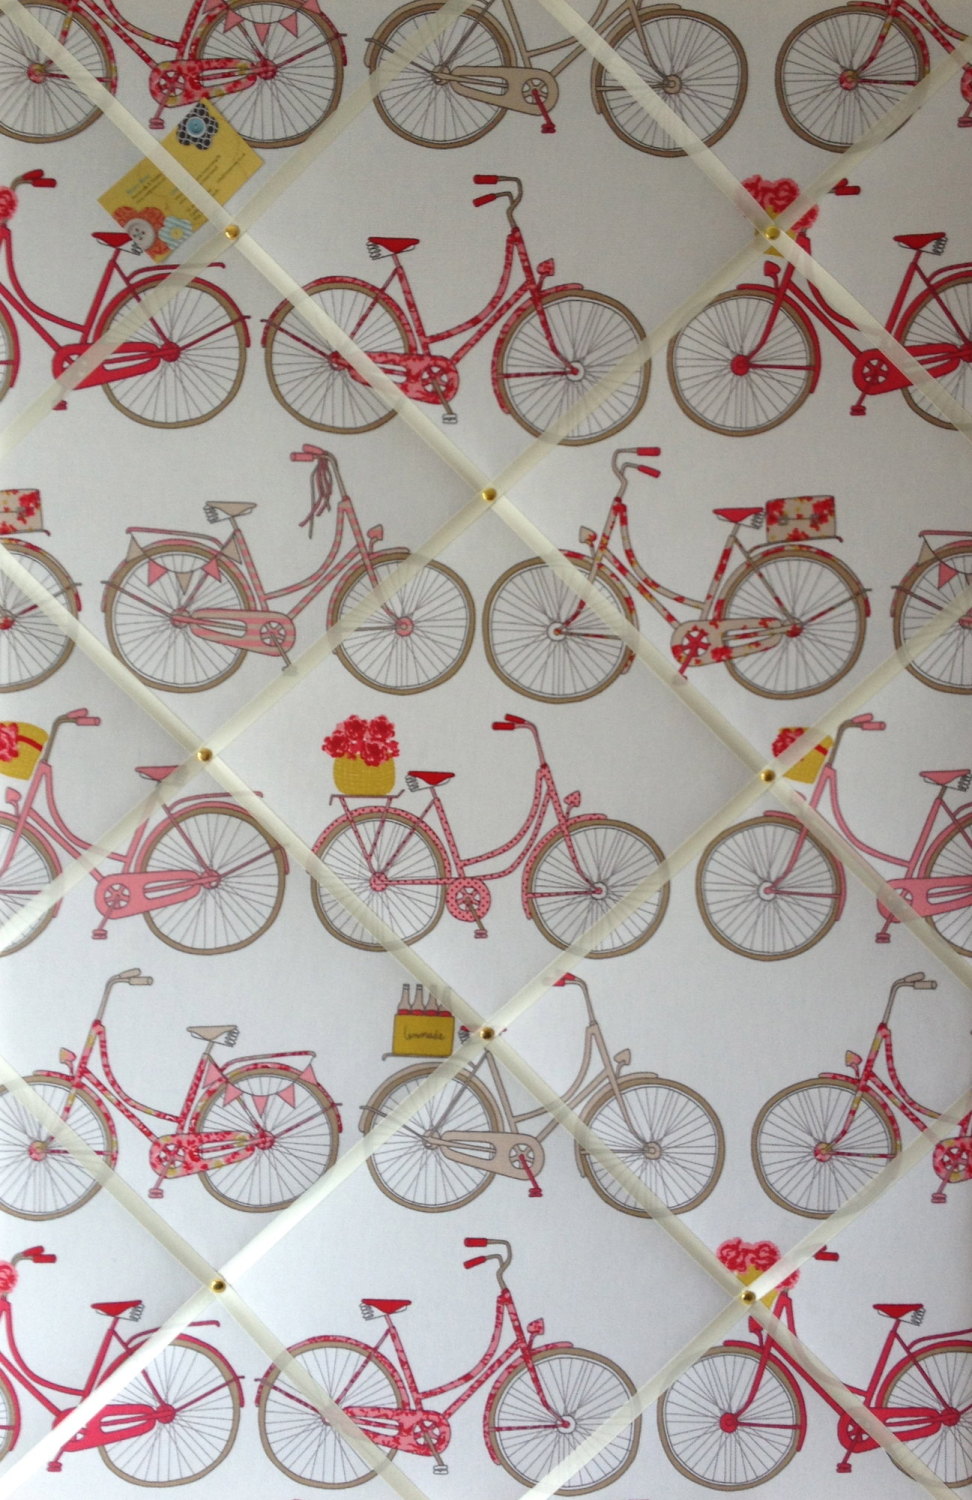 Large 60x40cm Ashley Wilde Poppy Totnes Cycling Bike Hand Crafted Fabric Me